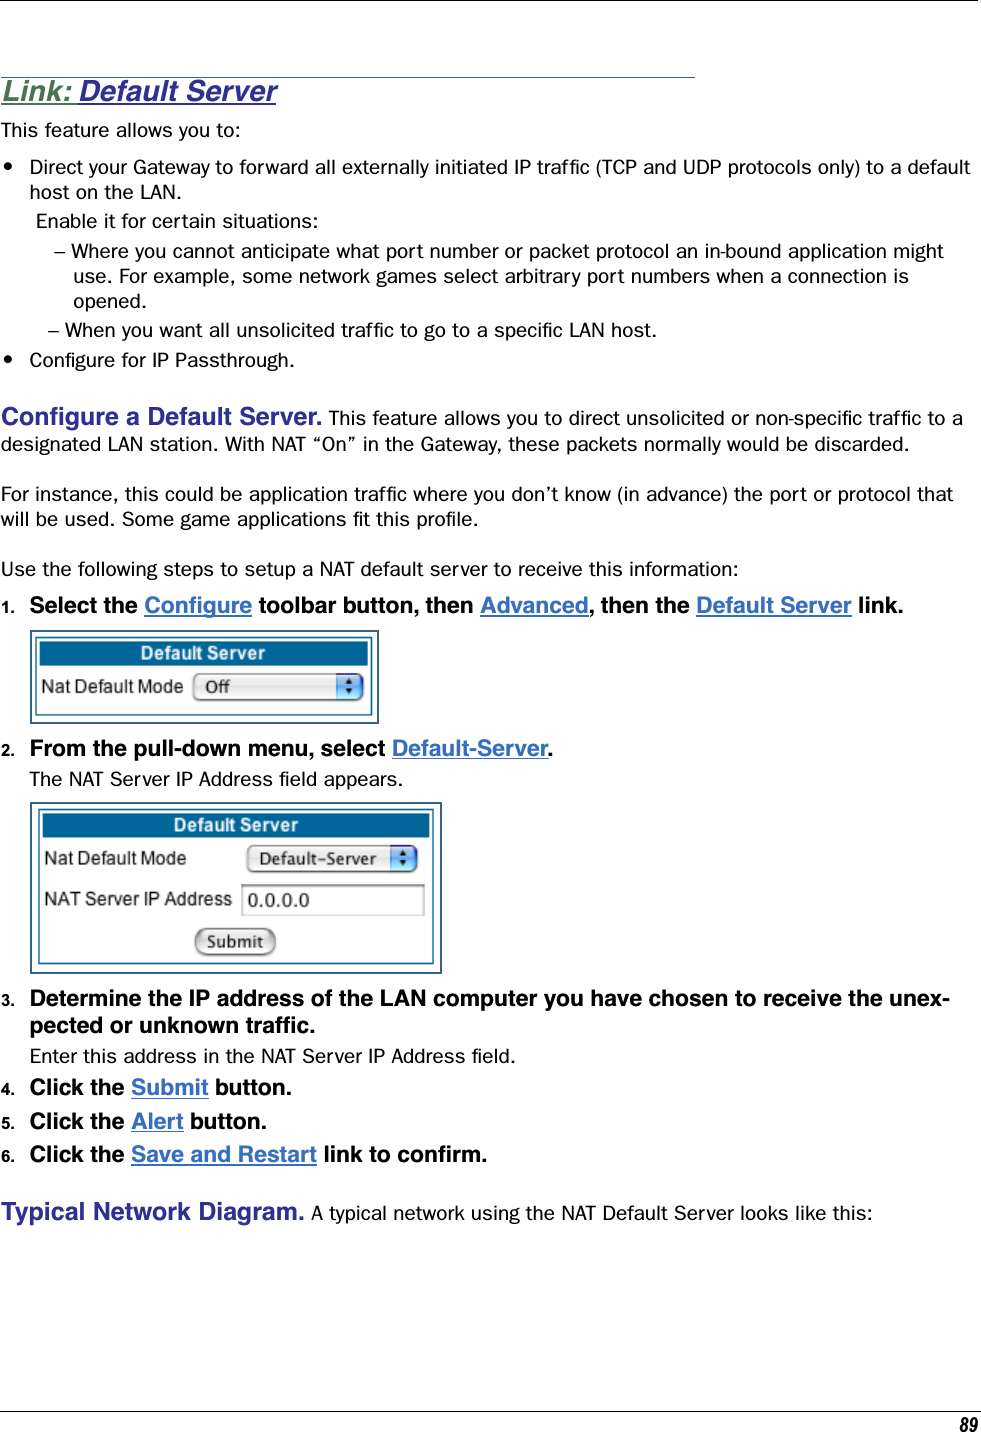 89Link: Default ServerThis feature allows you to:•Direct your Gateway to forward all externally initiated IP trafﬁc (TCP and UDP protocols only) to a default host on the LAN. Enable it for certain situations:    – Where you cannot anticipate what port number or packet protocol an in-bound application might        use. For example, some network games select arbitrary port numbers when a connection is       opened.   – When you want all unsolicited trafﬁc to go to a speciﬁc LAN host.•Conﬁgure for IP Passthrough.Conﬁgure a Default Server. This feature allows you to direct unsolicited or non-speciﬁc trafﬁc to a designated LAN station. With NAT “On” in the Gateway, these packets normally would be discarded. For instance, this could be application trafﬁc where you don’t know (in advance) the port or protocol that will be used. Some game applications ﬁt this proﬁle.Use the following steps to setup a NAT default server to receive this information:1. Select the Conﬁgure toolbar button, then Advanced, then the Default Server link.2. From the pull-down menu, select Default-Server. The NAT Server IP Address ﬁeld appears. 3. Determine the IP address of the LAN computer you have chosen to receive the unex-pected or unknown trafﬁc.Enter this address in the NAT Server IP Address ﬁeld.4. Click the Submit button. 5. Click the Alert button.6. Click the Save and Restart link to conﬁrm. Typical Network Diagram. A typical network using the NAT Default Server looks like this: